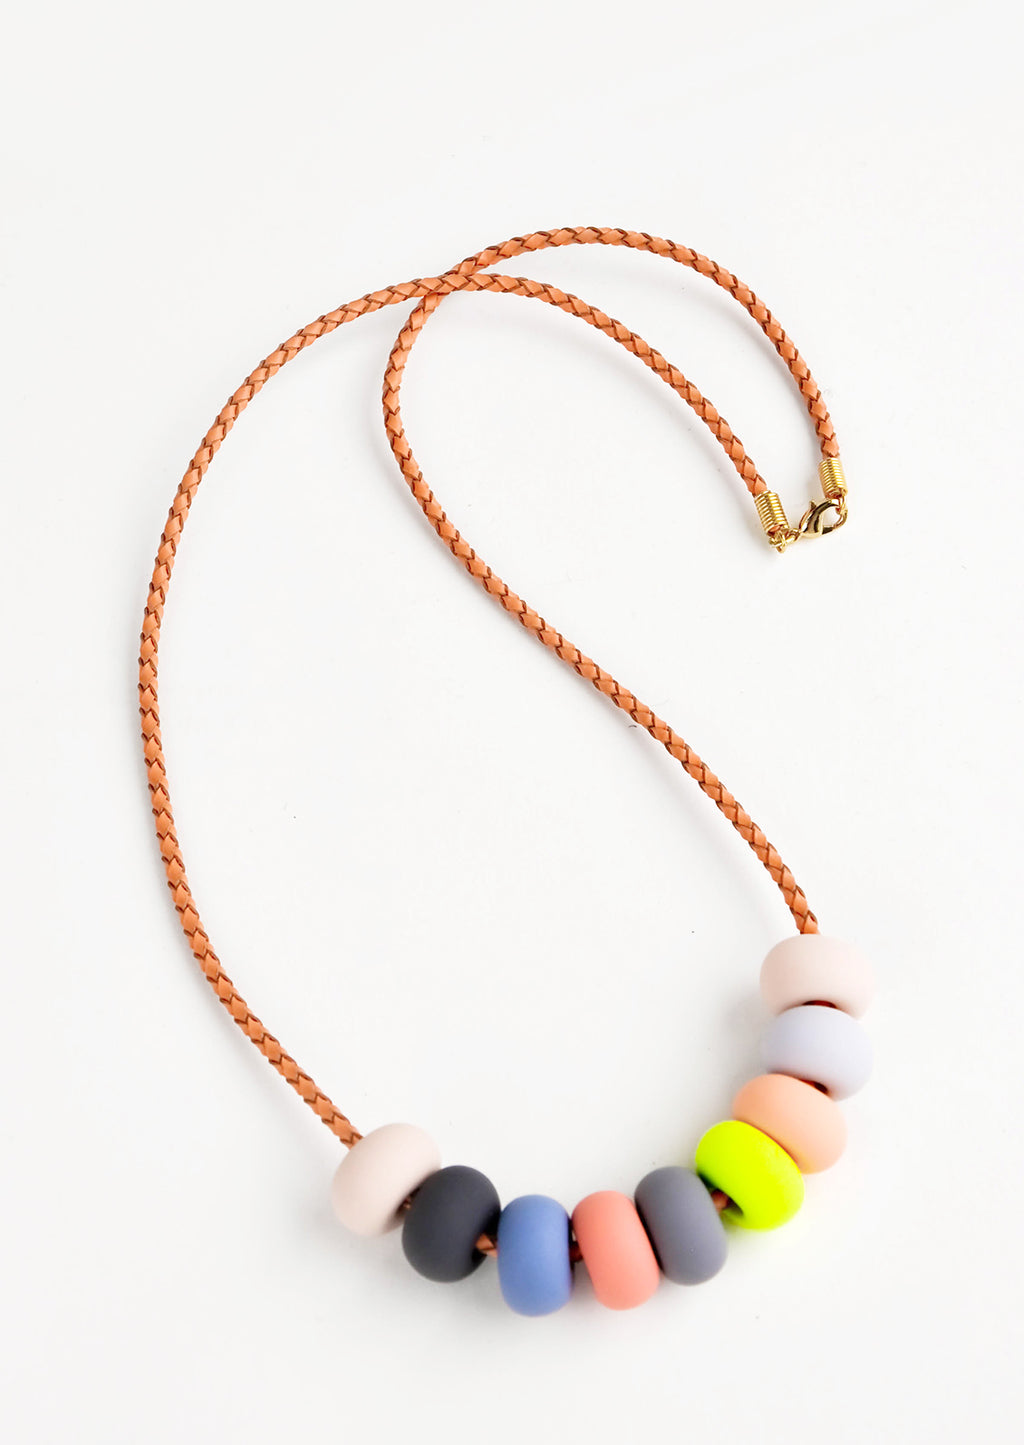 Cool Glow: Woven leather cord necklace with gold clasp and rounded clay beads tans, pinks,gray, blue, and neon yellow.